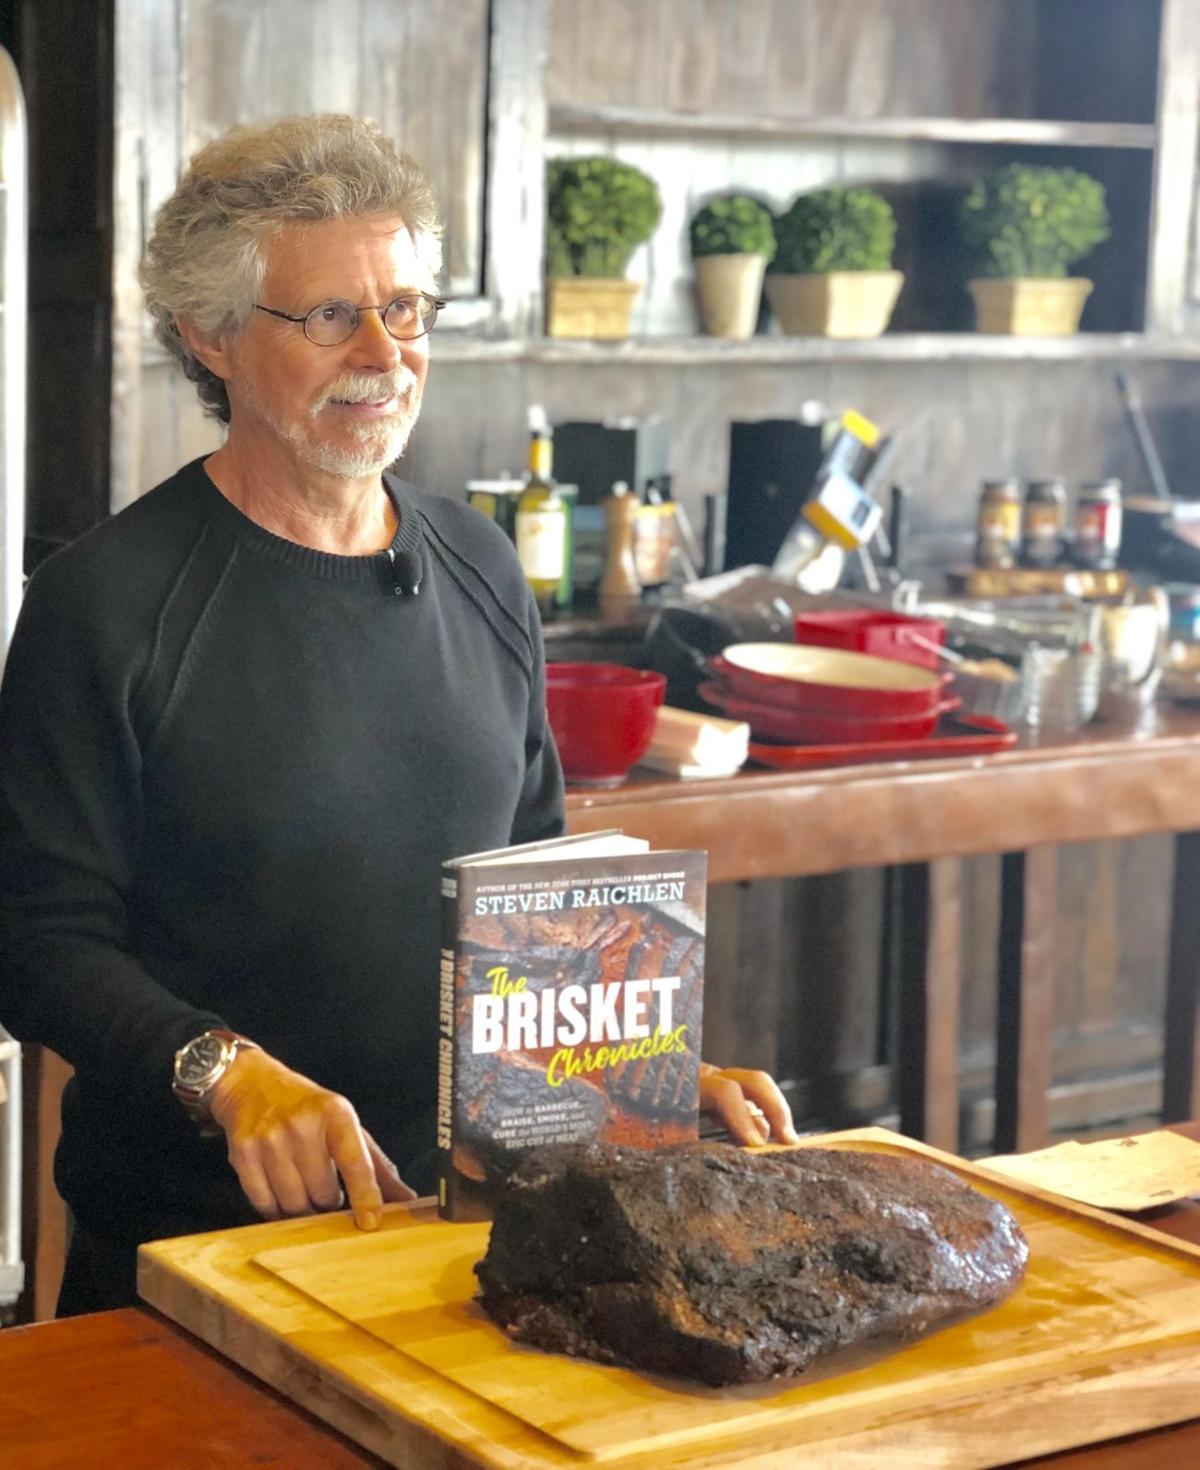 Barbecue University wows with an 'epic' brisket in Colorado Springs ...